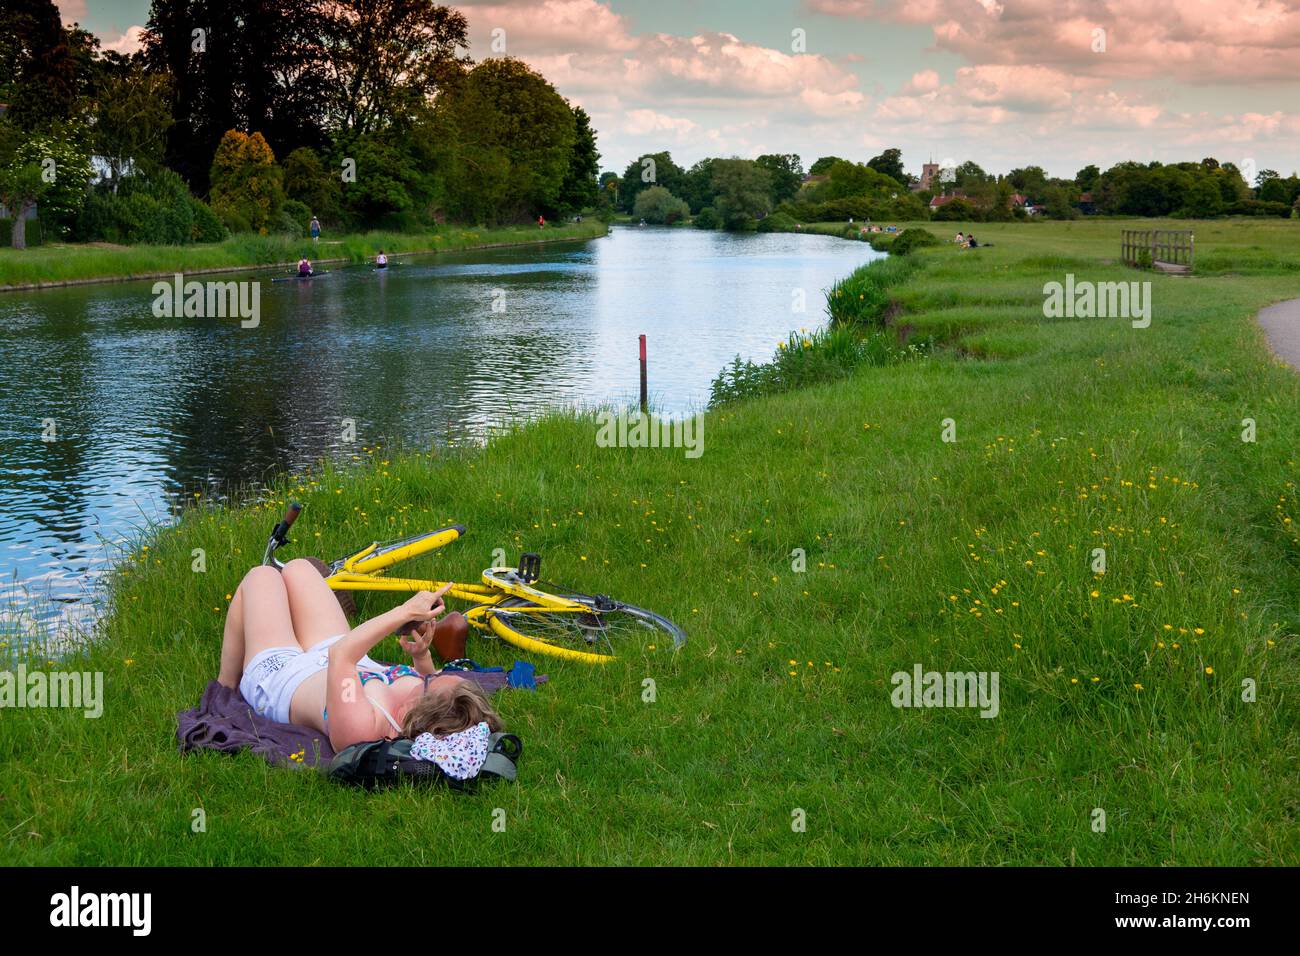 Young girl relaxing alone lying on grass meadows looking at her phone with yellow cycle on the bank of the River Cam near Cambridge England Stock Photo